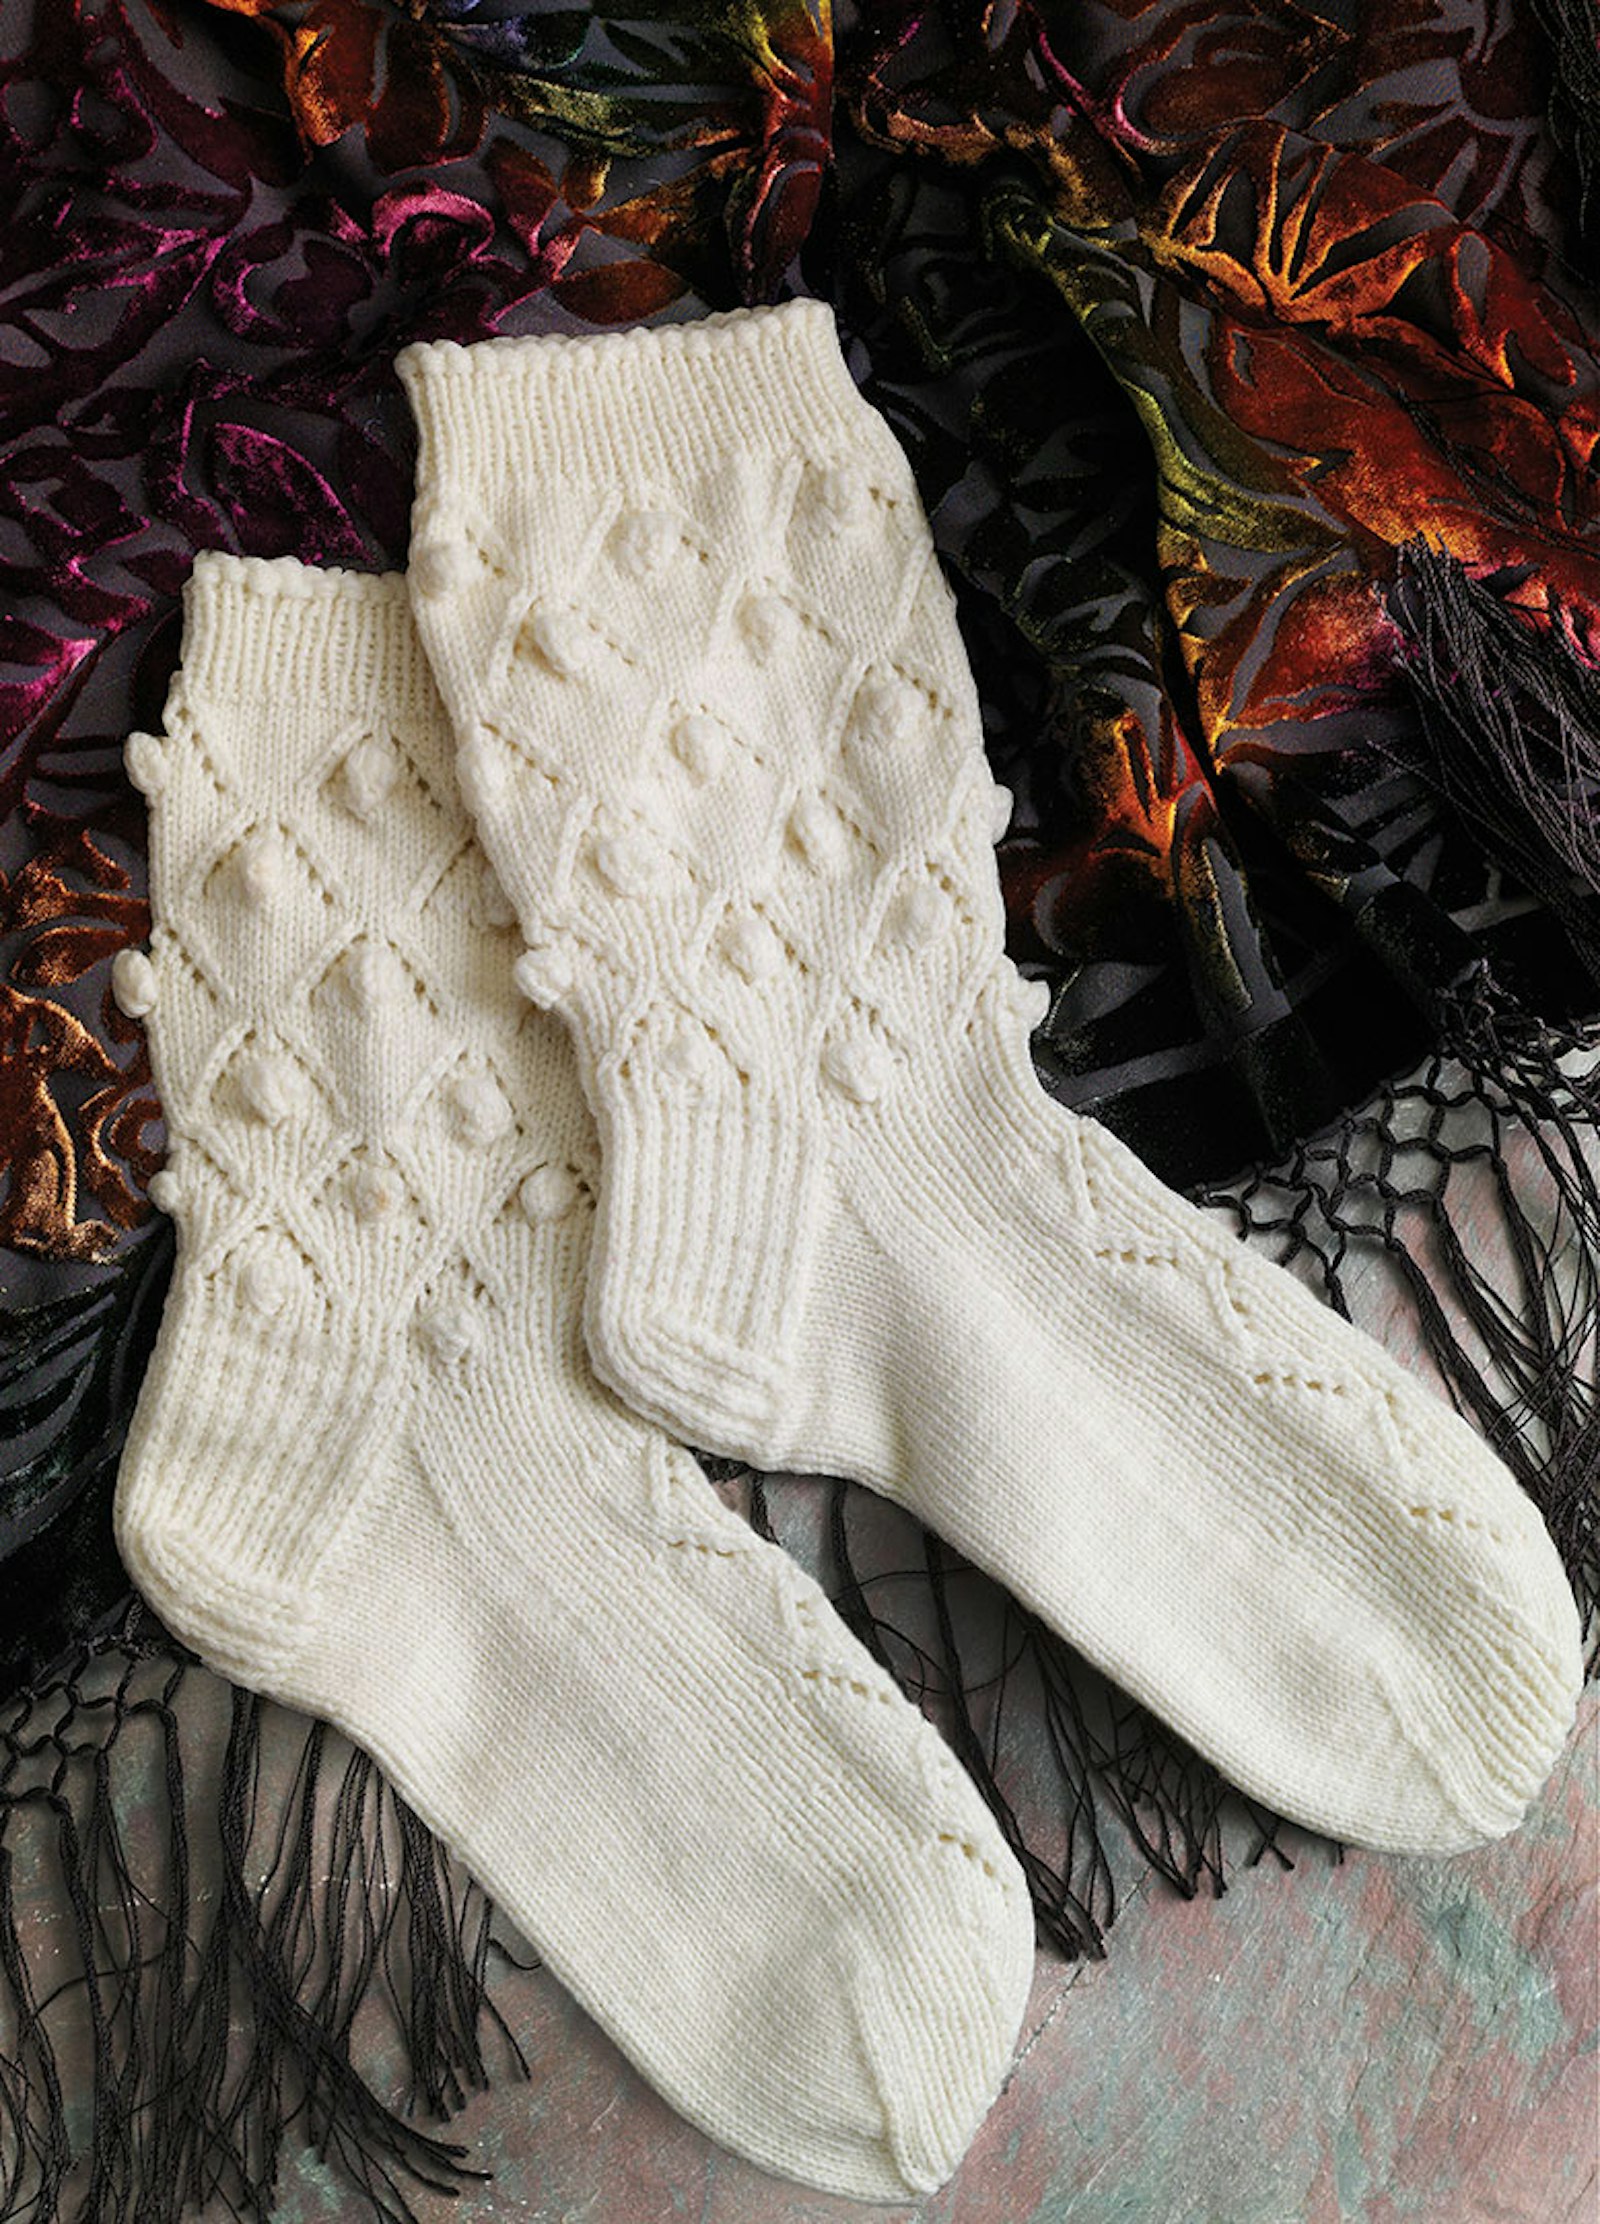 Lace Dancing Socks from Spain